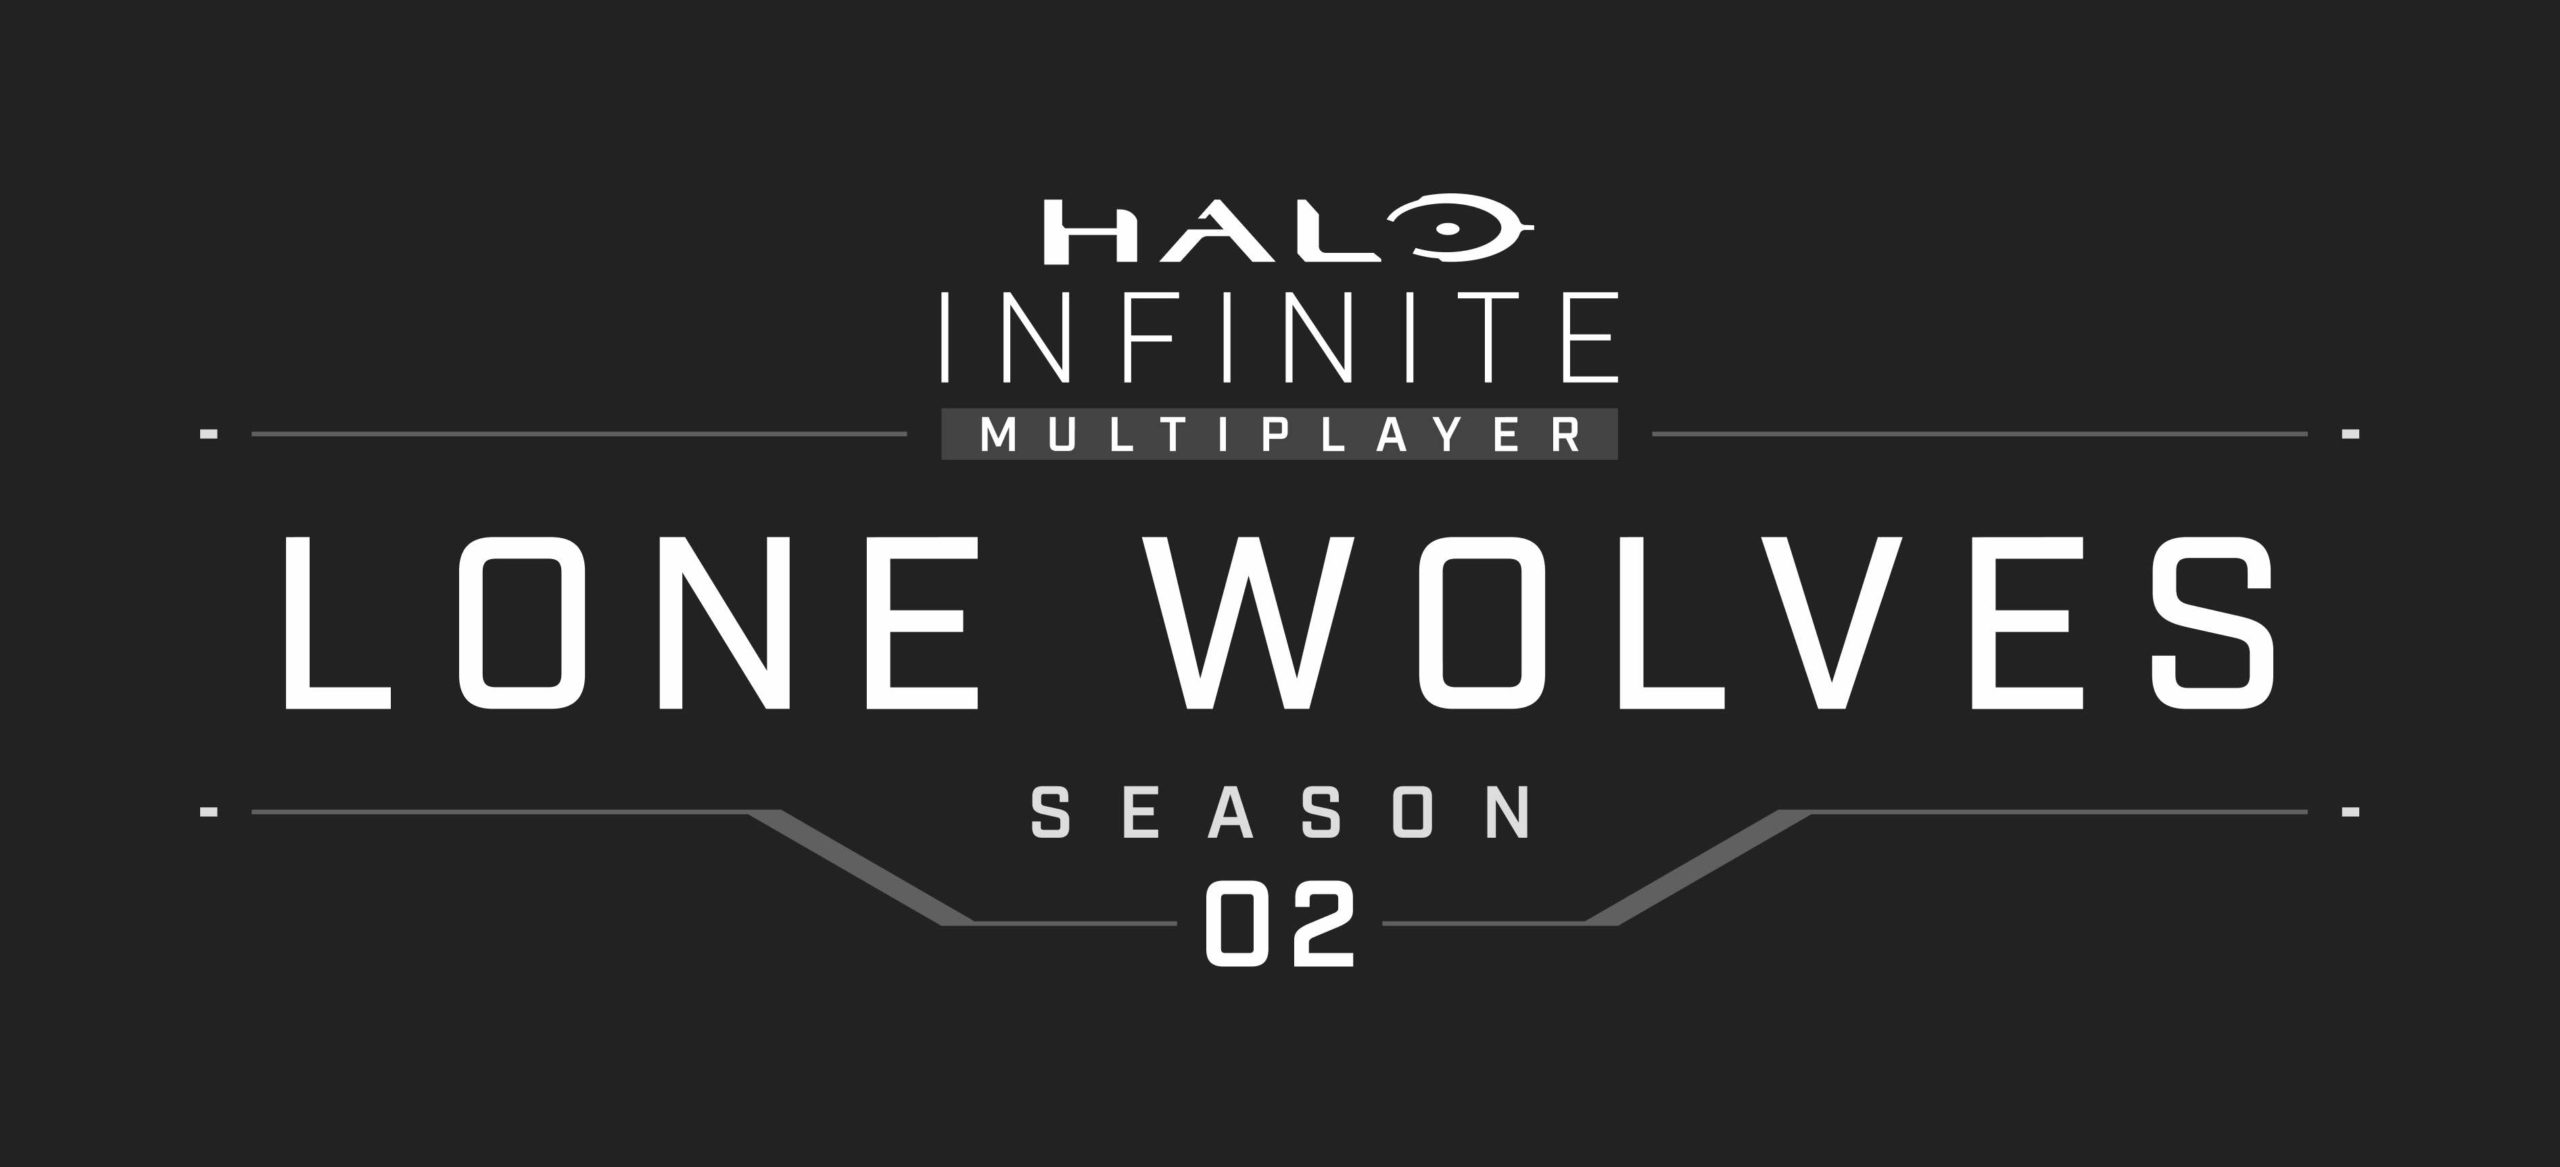 Halo Infinite Season 2 brings new maps and modes in May